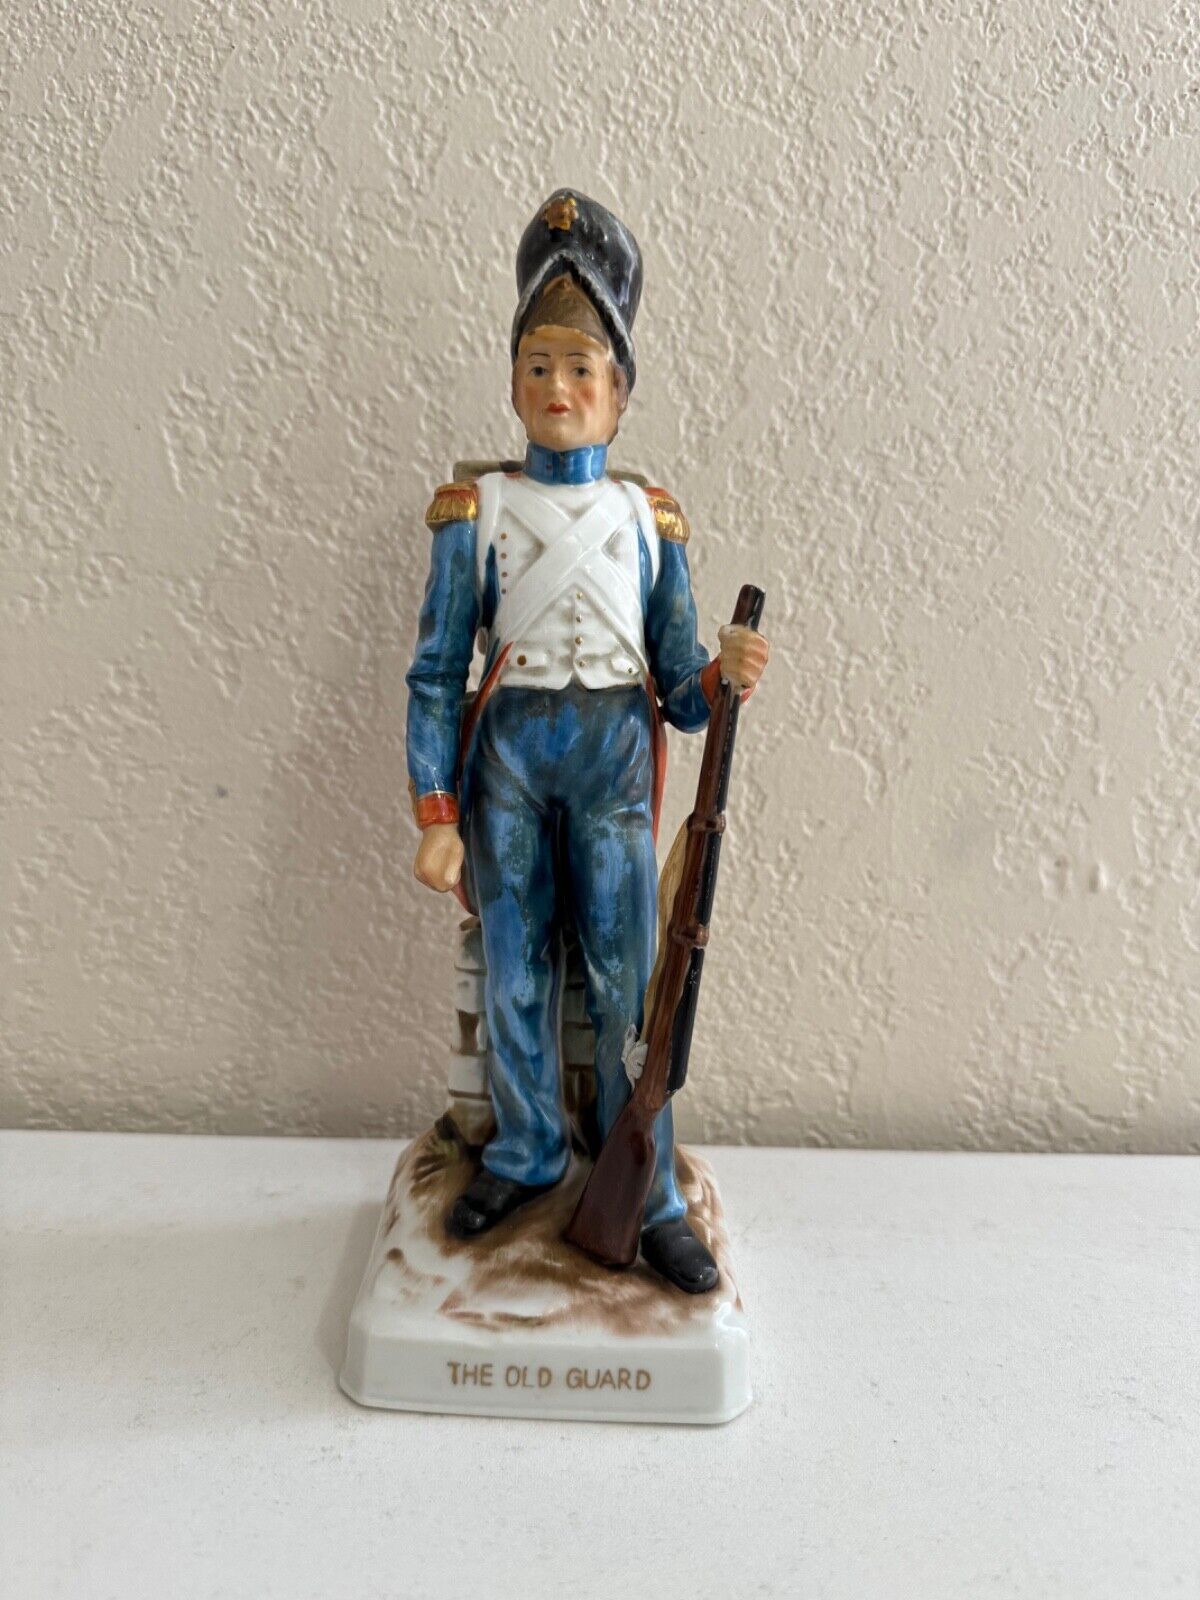 Porcelain Military Soldier Figurine The Old Guard w/ Mark Underneath